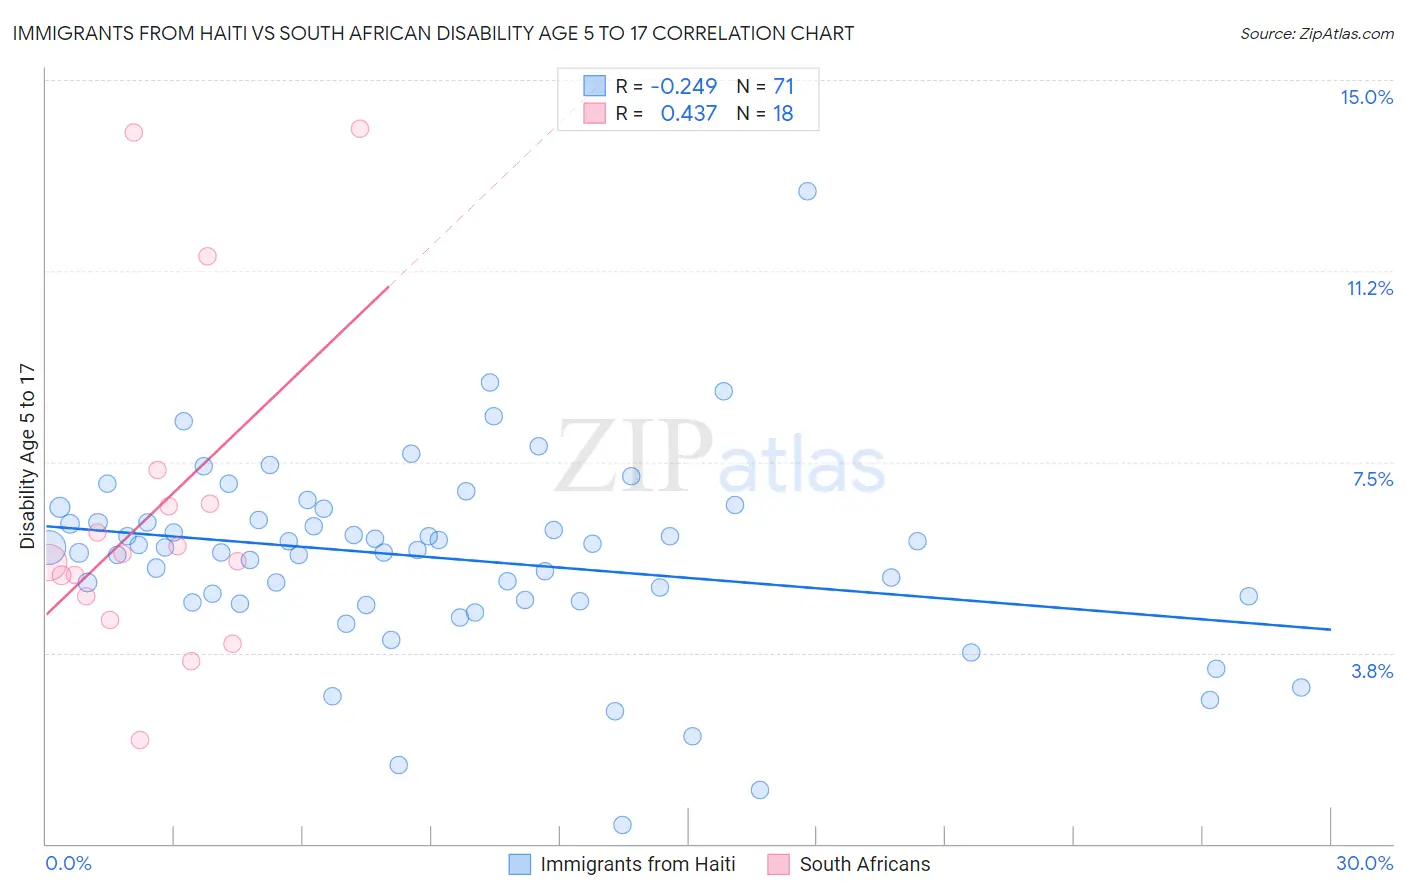 Immigrants from Haiti vs South African Disability Age 5 to 17